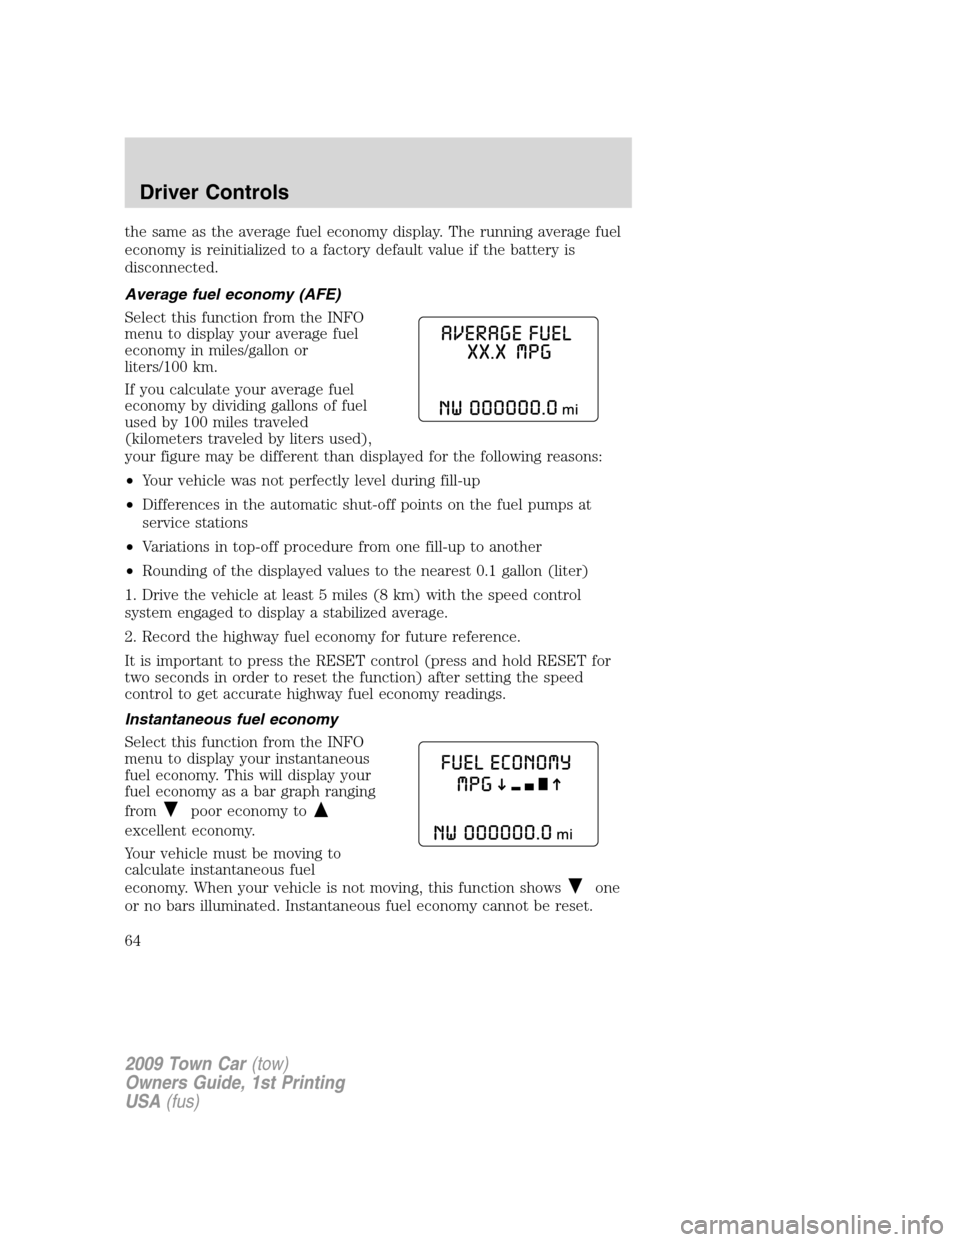 LINCOLN TOWN CAR 2009 Repair Manual the same as the average fuel economy display. The running average fuel
economy is reinitialized to a factory default value if the battery is
disconnected.
Average fuel economy (AFE)
Select this functi